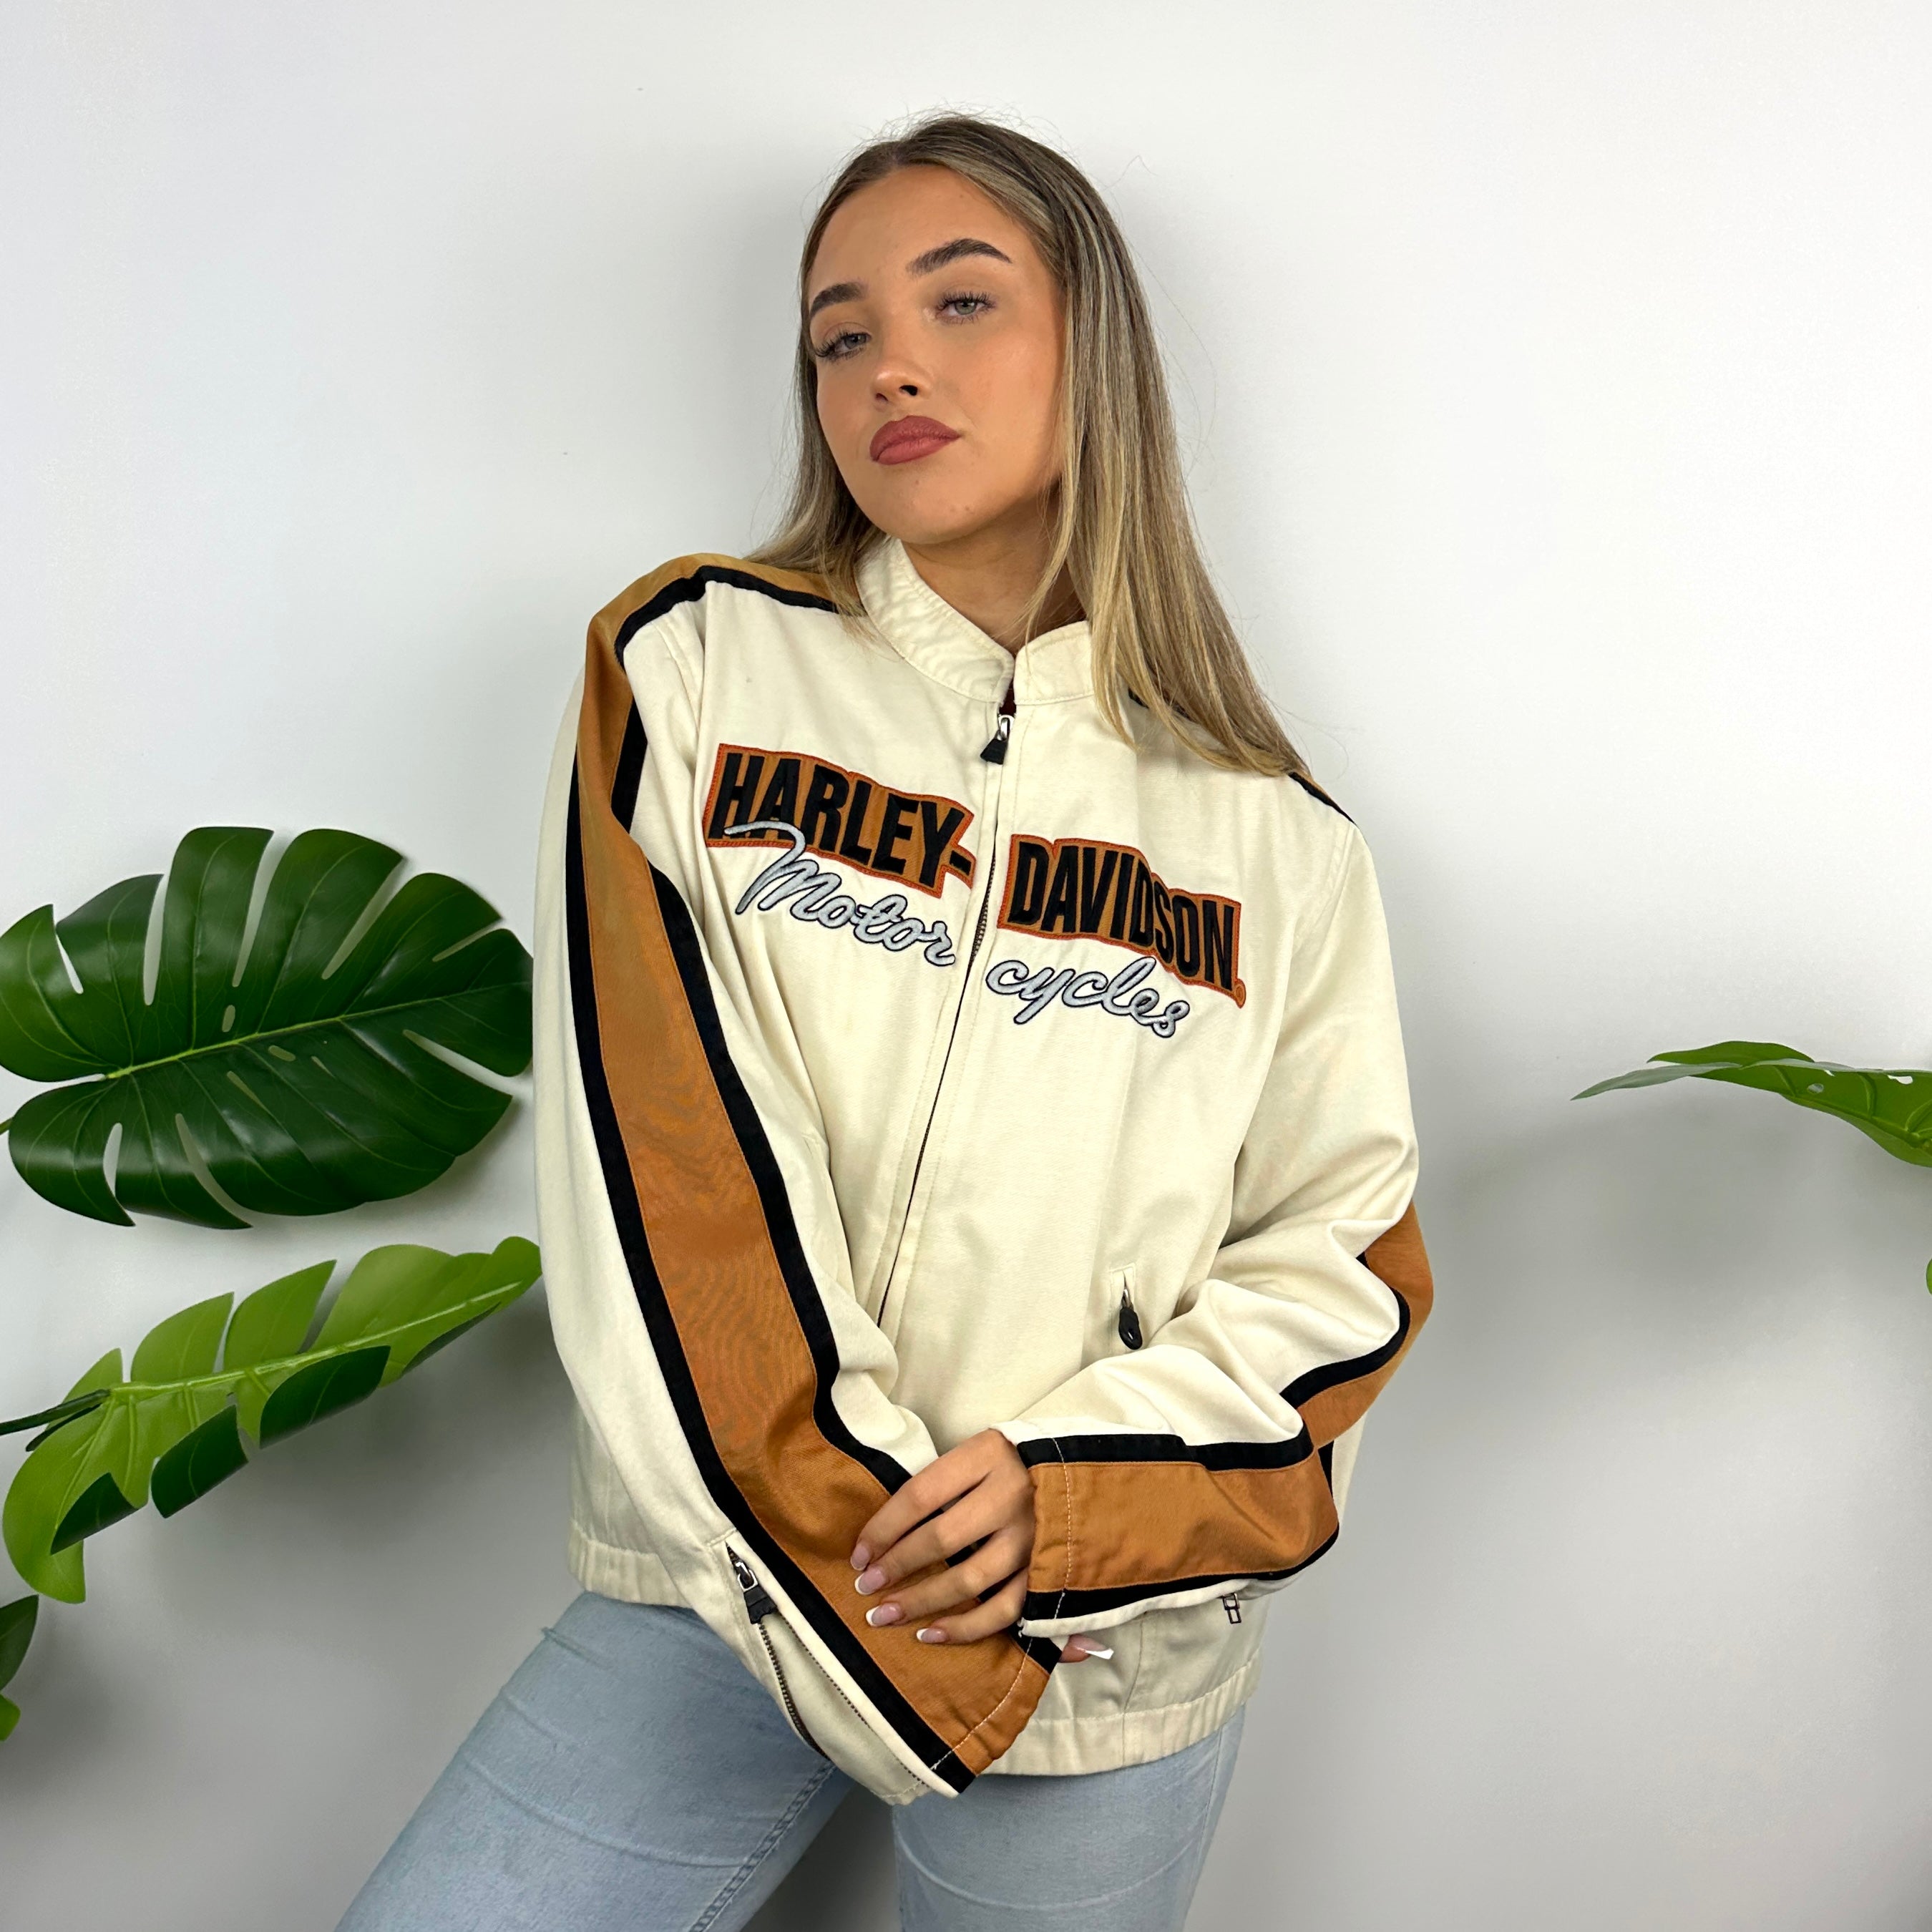 Harley Davidson Cream Embroidered Spell Out Jacket (L)